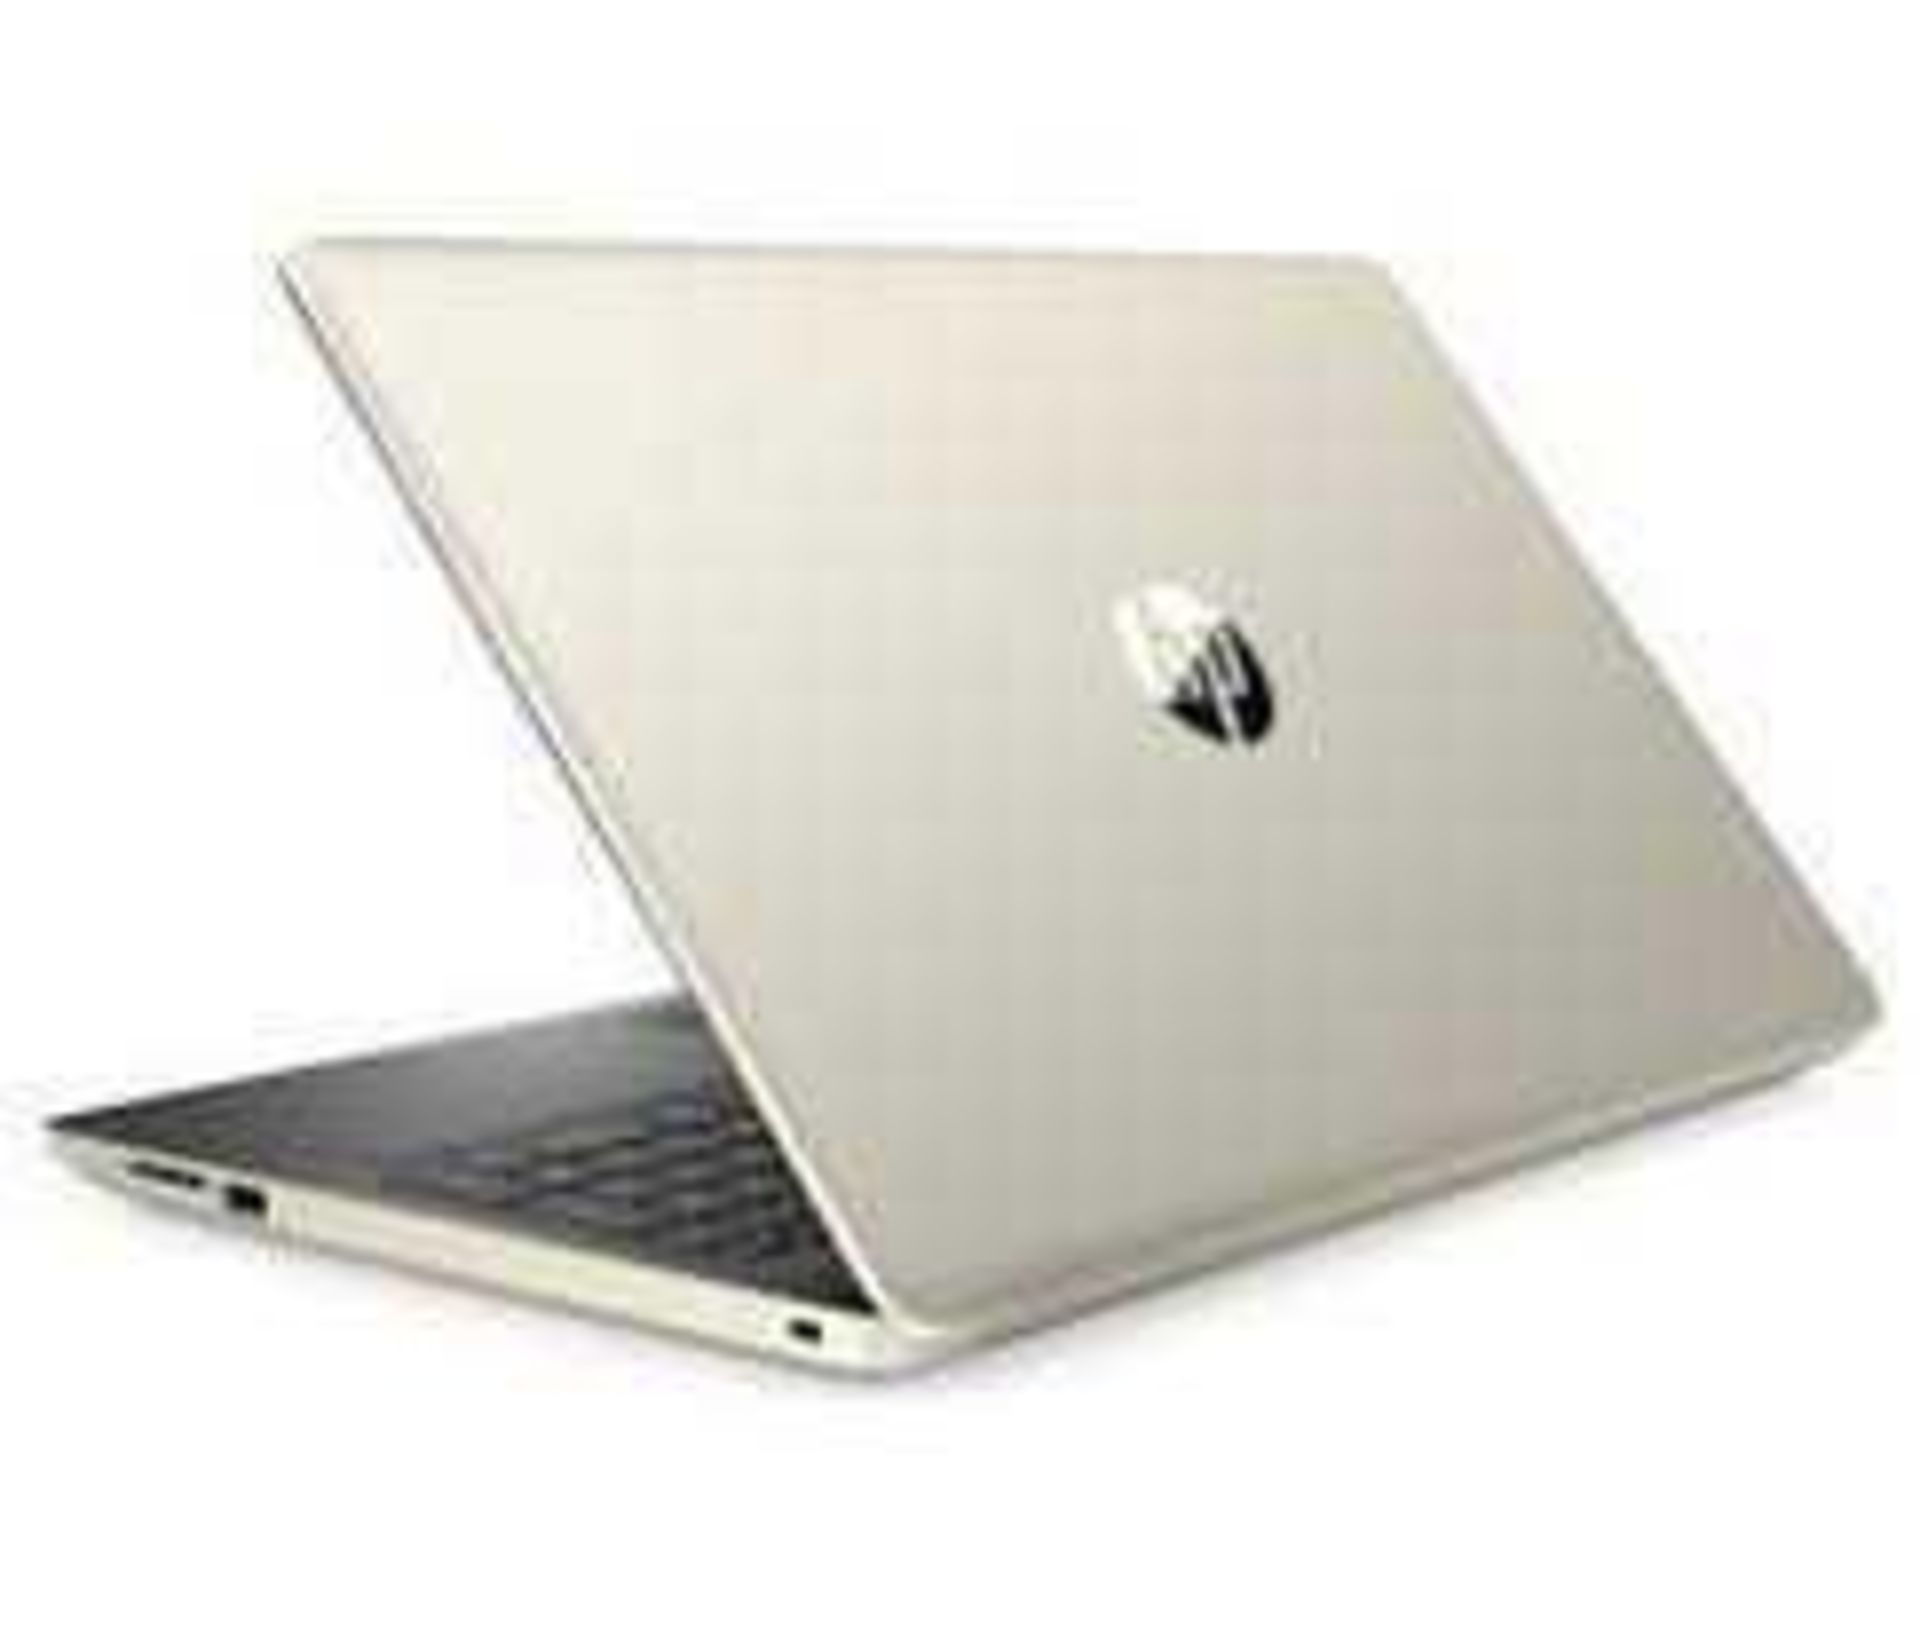 RRP £250 Gold Hp Unboxed Laptop (Appraisals Available On Request) (Pictures For Illustration